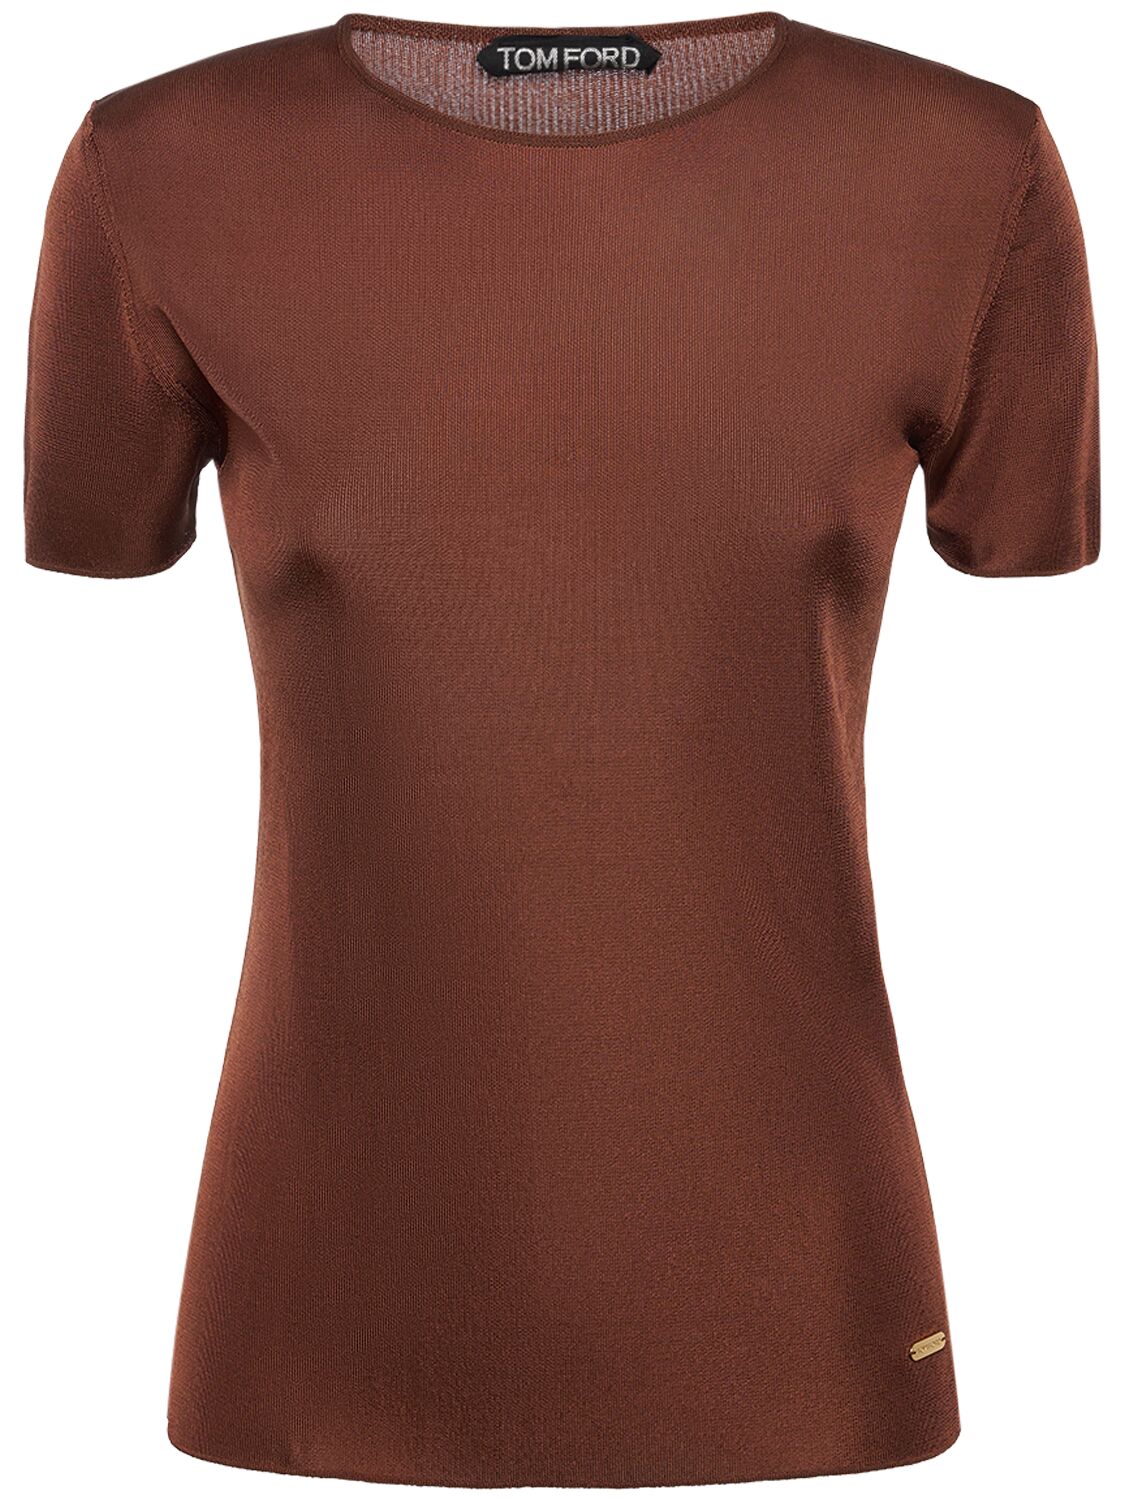 Tom Ford Compact Slinky Viscose T-shirt In Brown